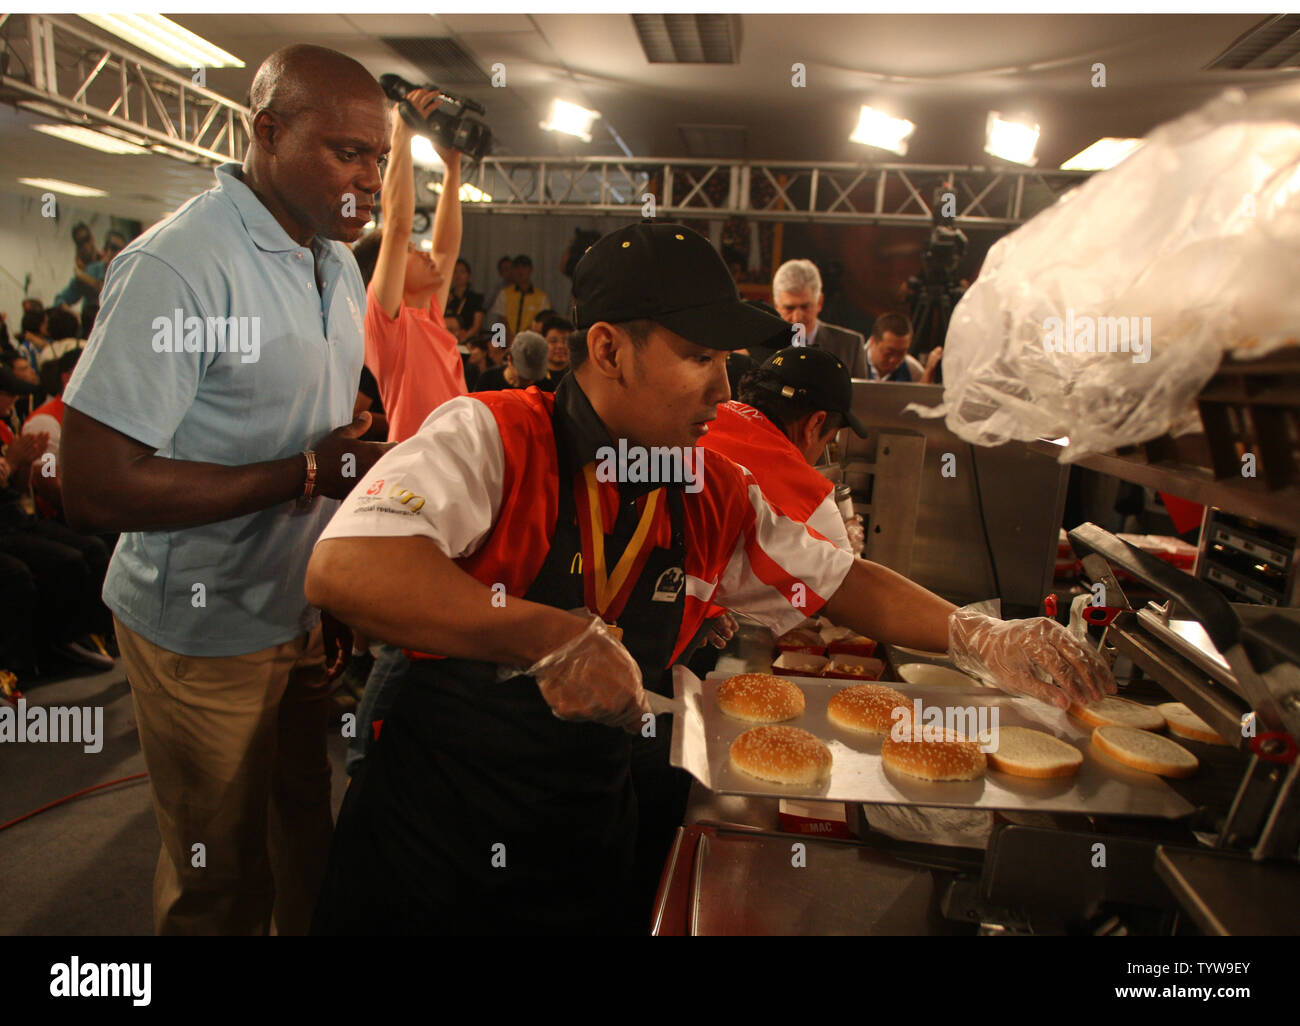 Carl Lewis (L), winner of 9 Olympic gold medals, coaches a team in a Big Mac building competition of employees from around the world, at a new McDonald's on the Olympic Green in Beijing on August 7, 2008.  McDonald's is the official restaurant of the Olympic Games.  (UPI Photo/Terry Schmitt) Stock Photo